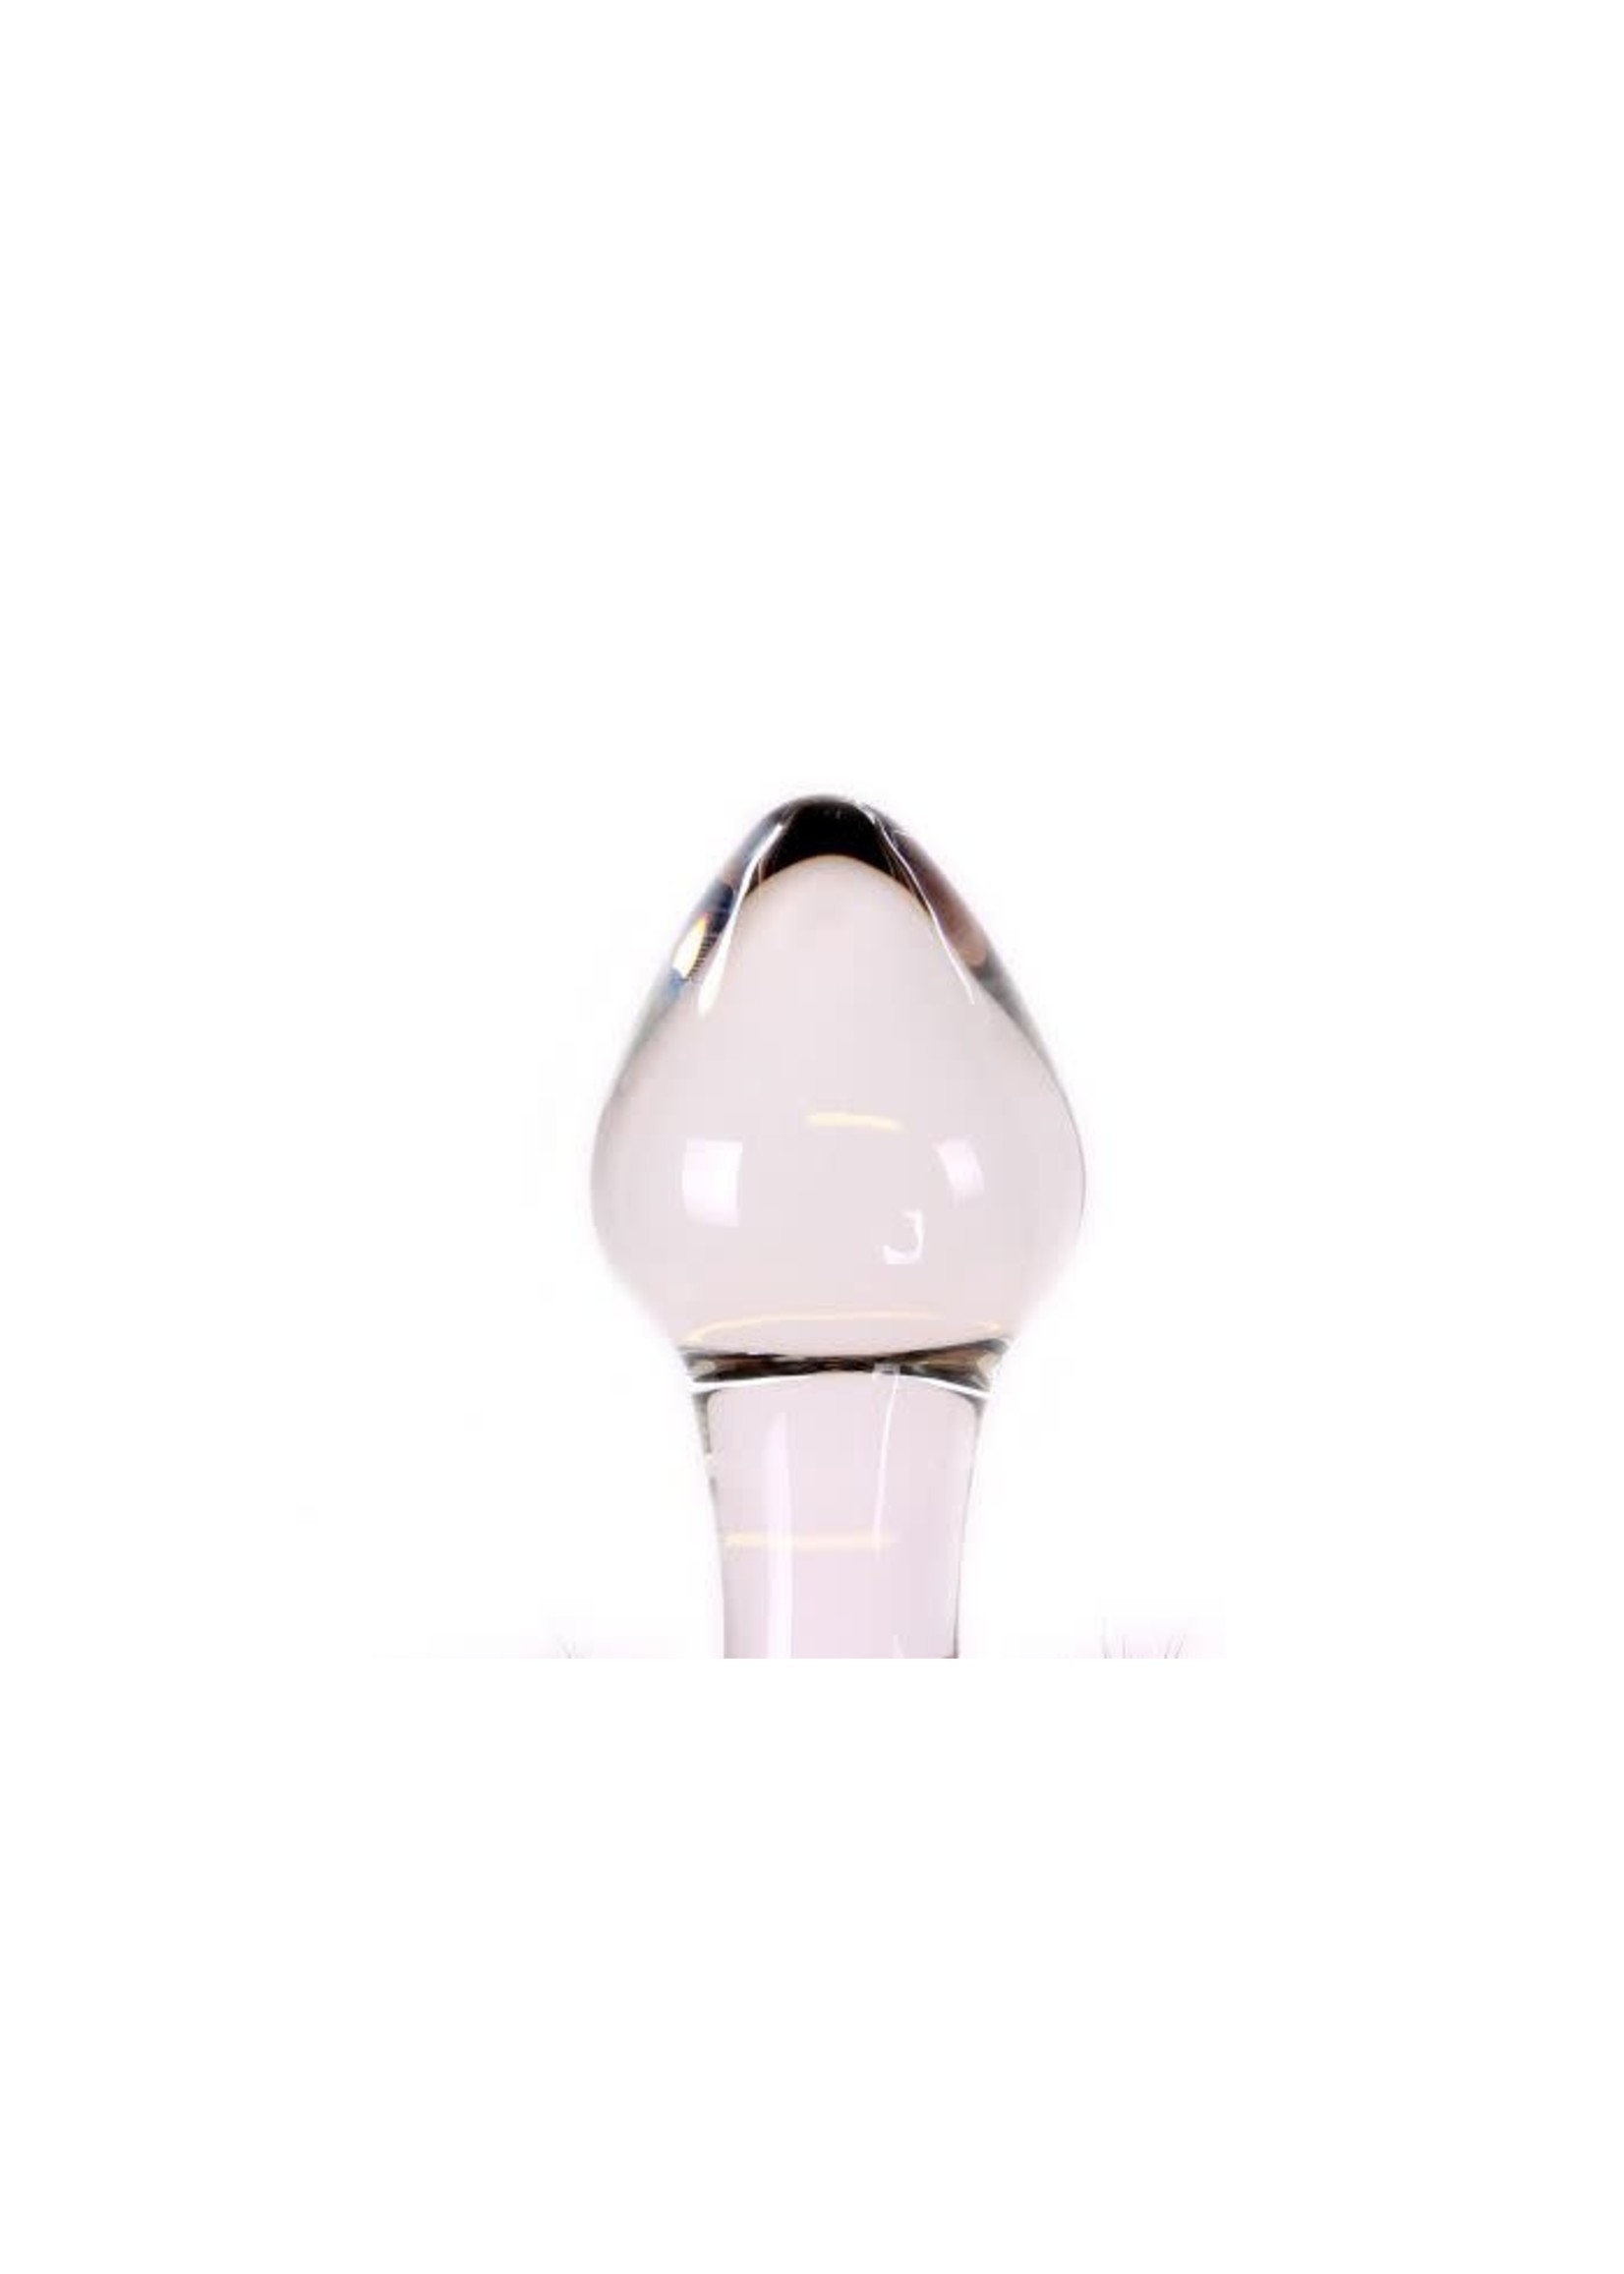 Kiotos Buttplug clear with white tickler